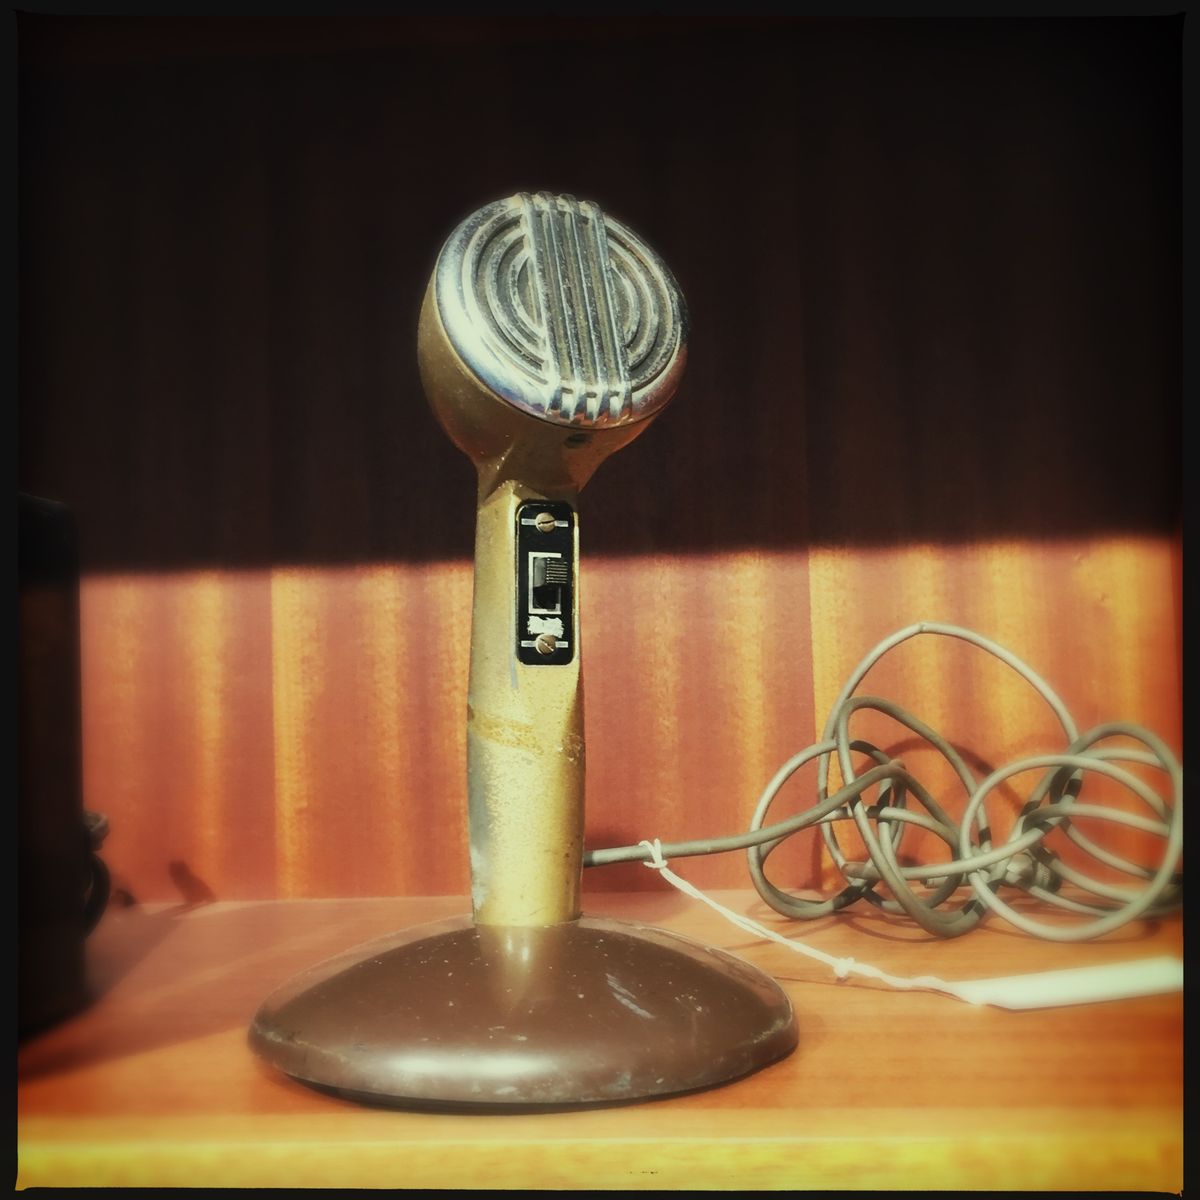 <p>If it seems like the type of item not many people would be interested in, that's okay. Successful musicians and music producers might pay thousands for a vintage mic like the handmade <a href="https://go.redirectingat.com?id=74968X1553576&url=https%3A%2F%2Fwww.ebay.com%2Fitm%2FNeumann-M49-Tube-Condenser-Microphone-serial-246-hand-made-in-Germany-1951%2F193173358030%3Fhash%3Ditem2cfa0785ce%253Ag%253AoFAAAOSwL-FdsMdR&sref=https%3A%2F%2Fwww.bestproducts.com%2Flifestyle%2Fg35989192%2Fgarage-sale-items-antiques-worth%2F">Neumann M49 Tube Condenser Microphone </a>from 1951. It was listed on eBay for $12,500.</p>